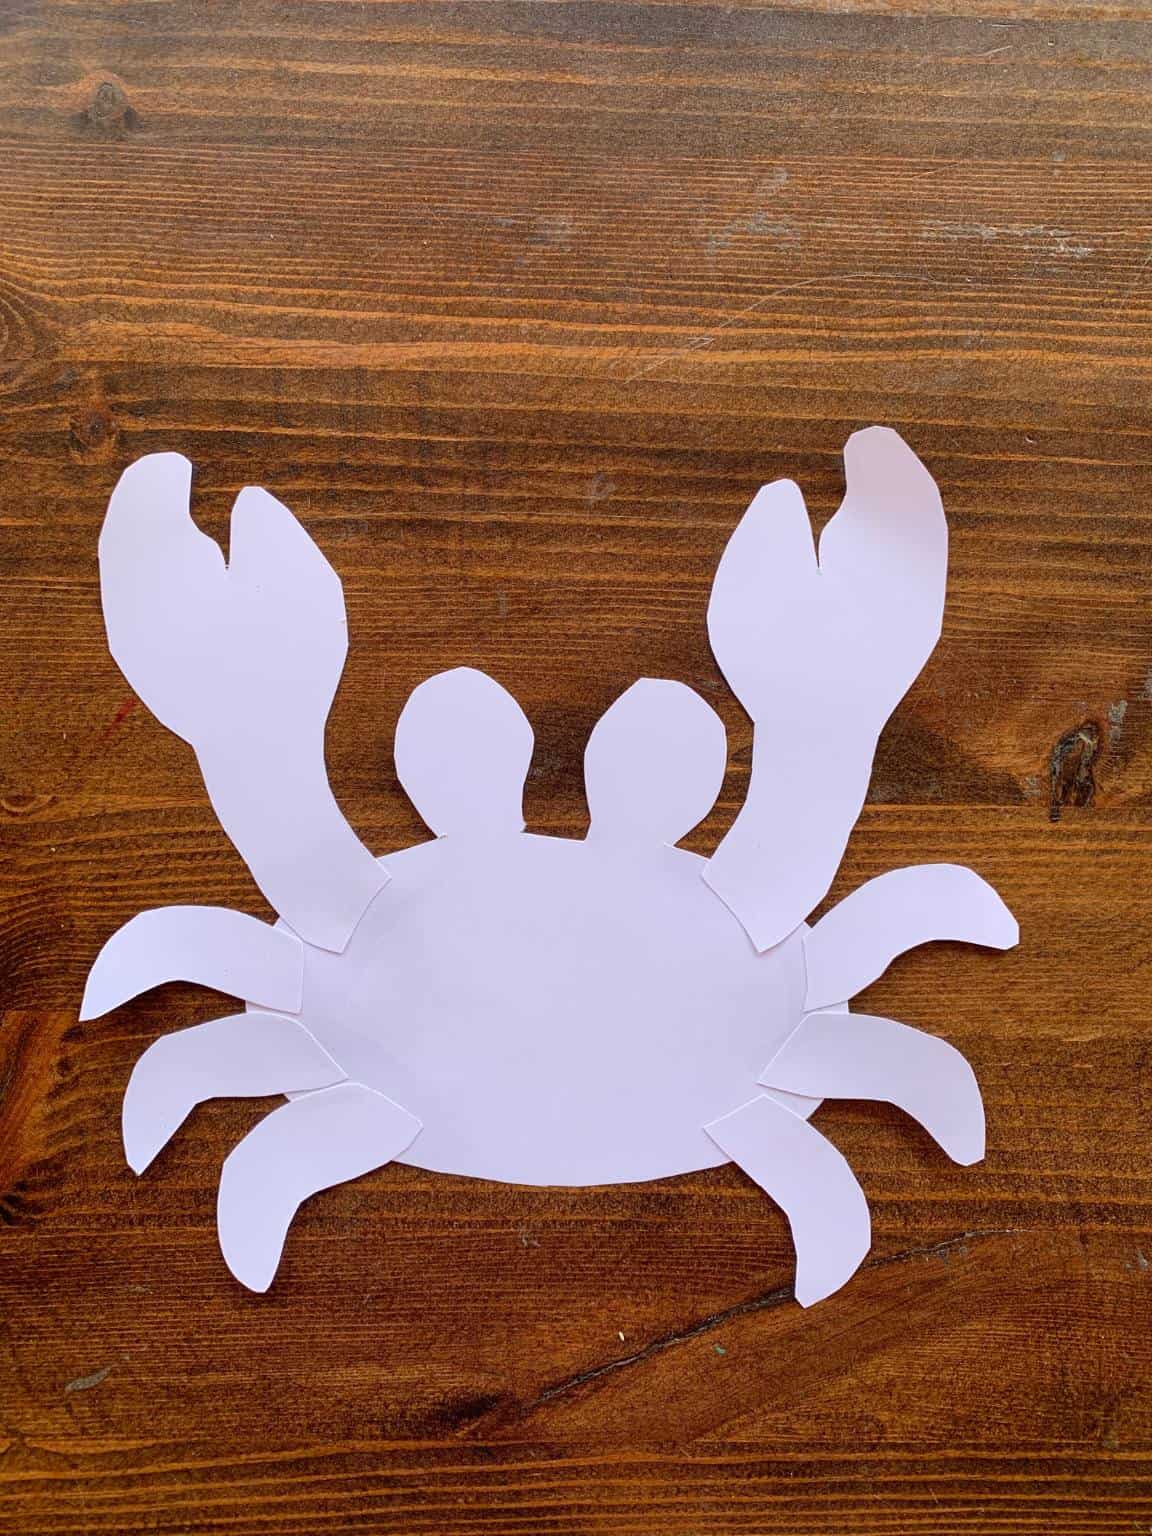 A photo of the back of a cut and paste crab craft